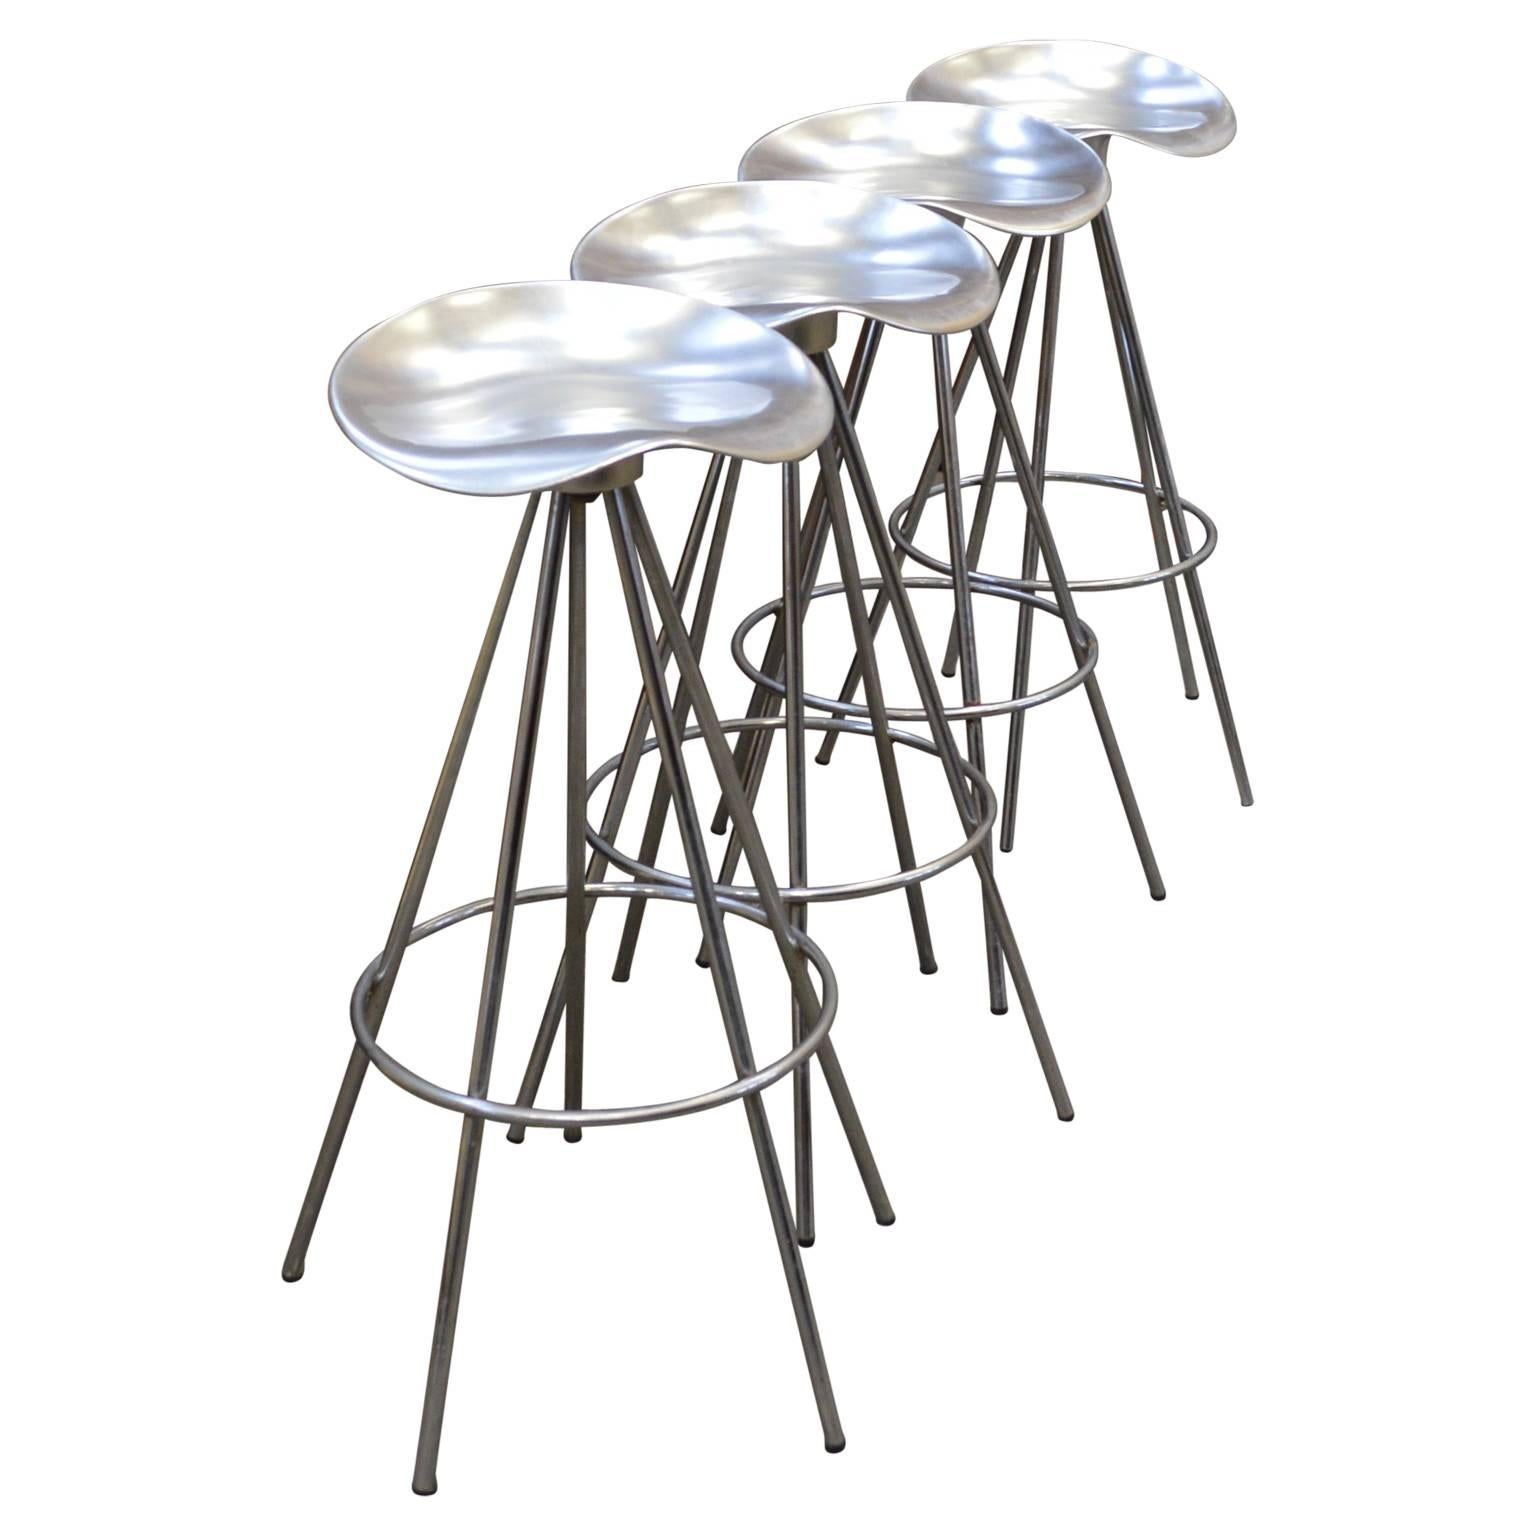 Four Chrome Jamaica Swivel Bar Stools by Pepe Cortes for Knoll